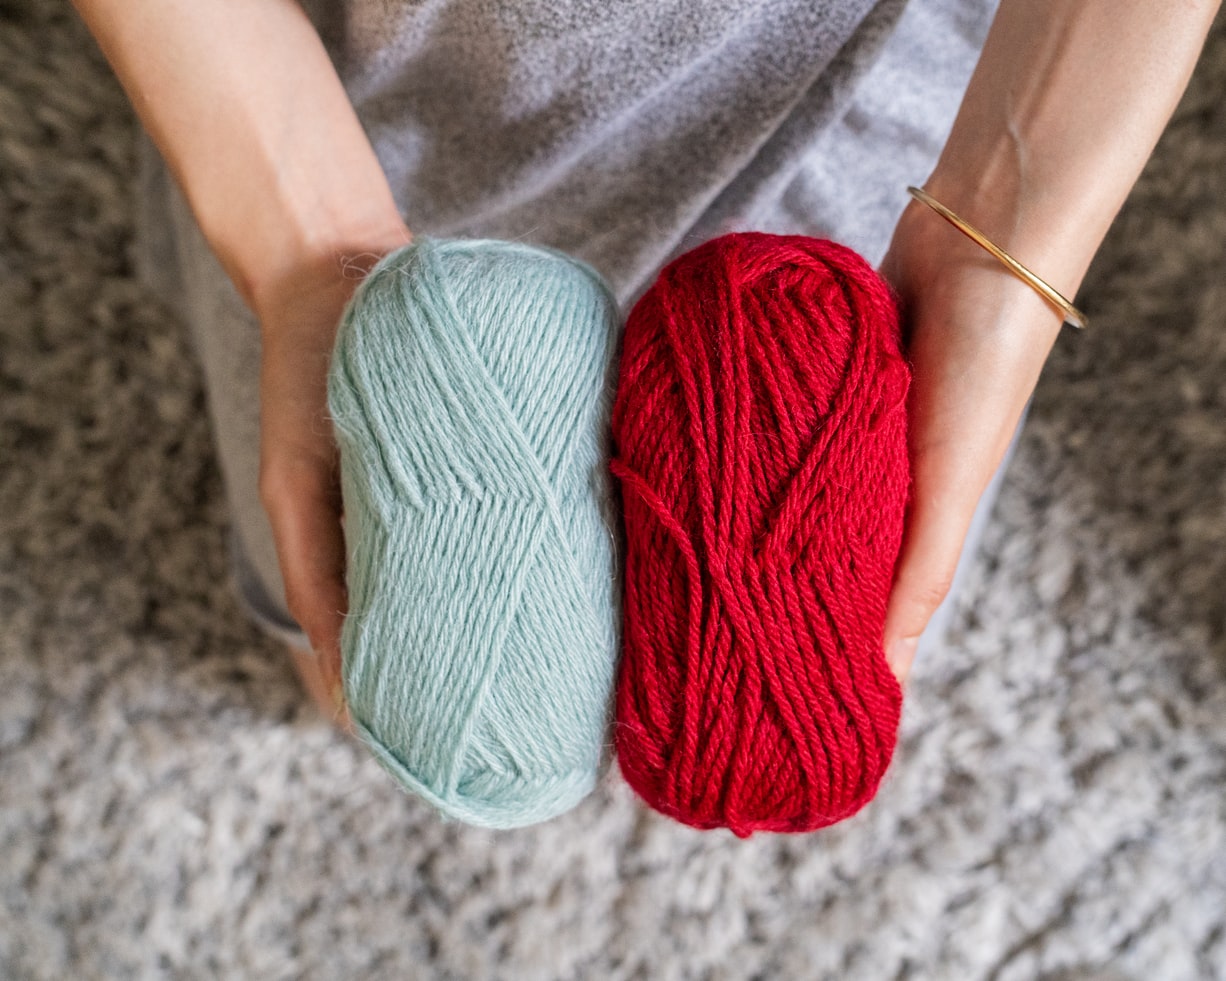 Learn the Differences Between Knitting and Crocheting